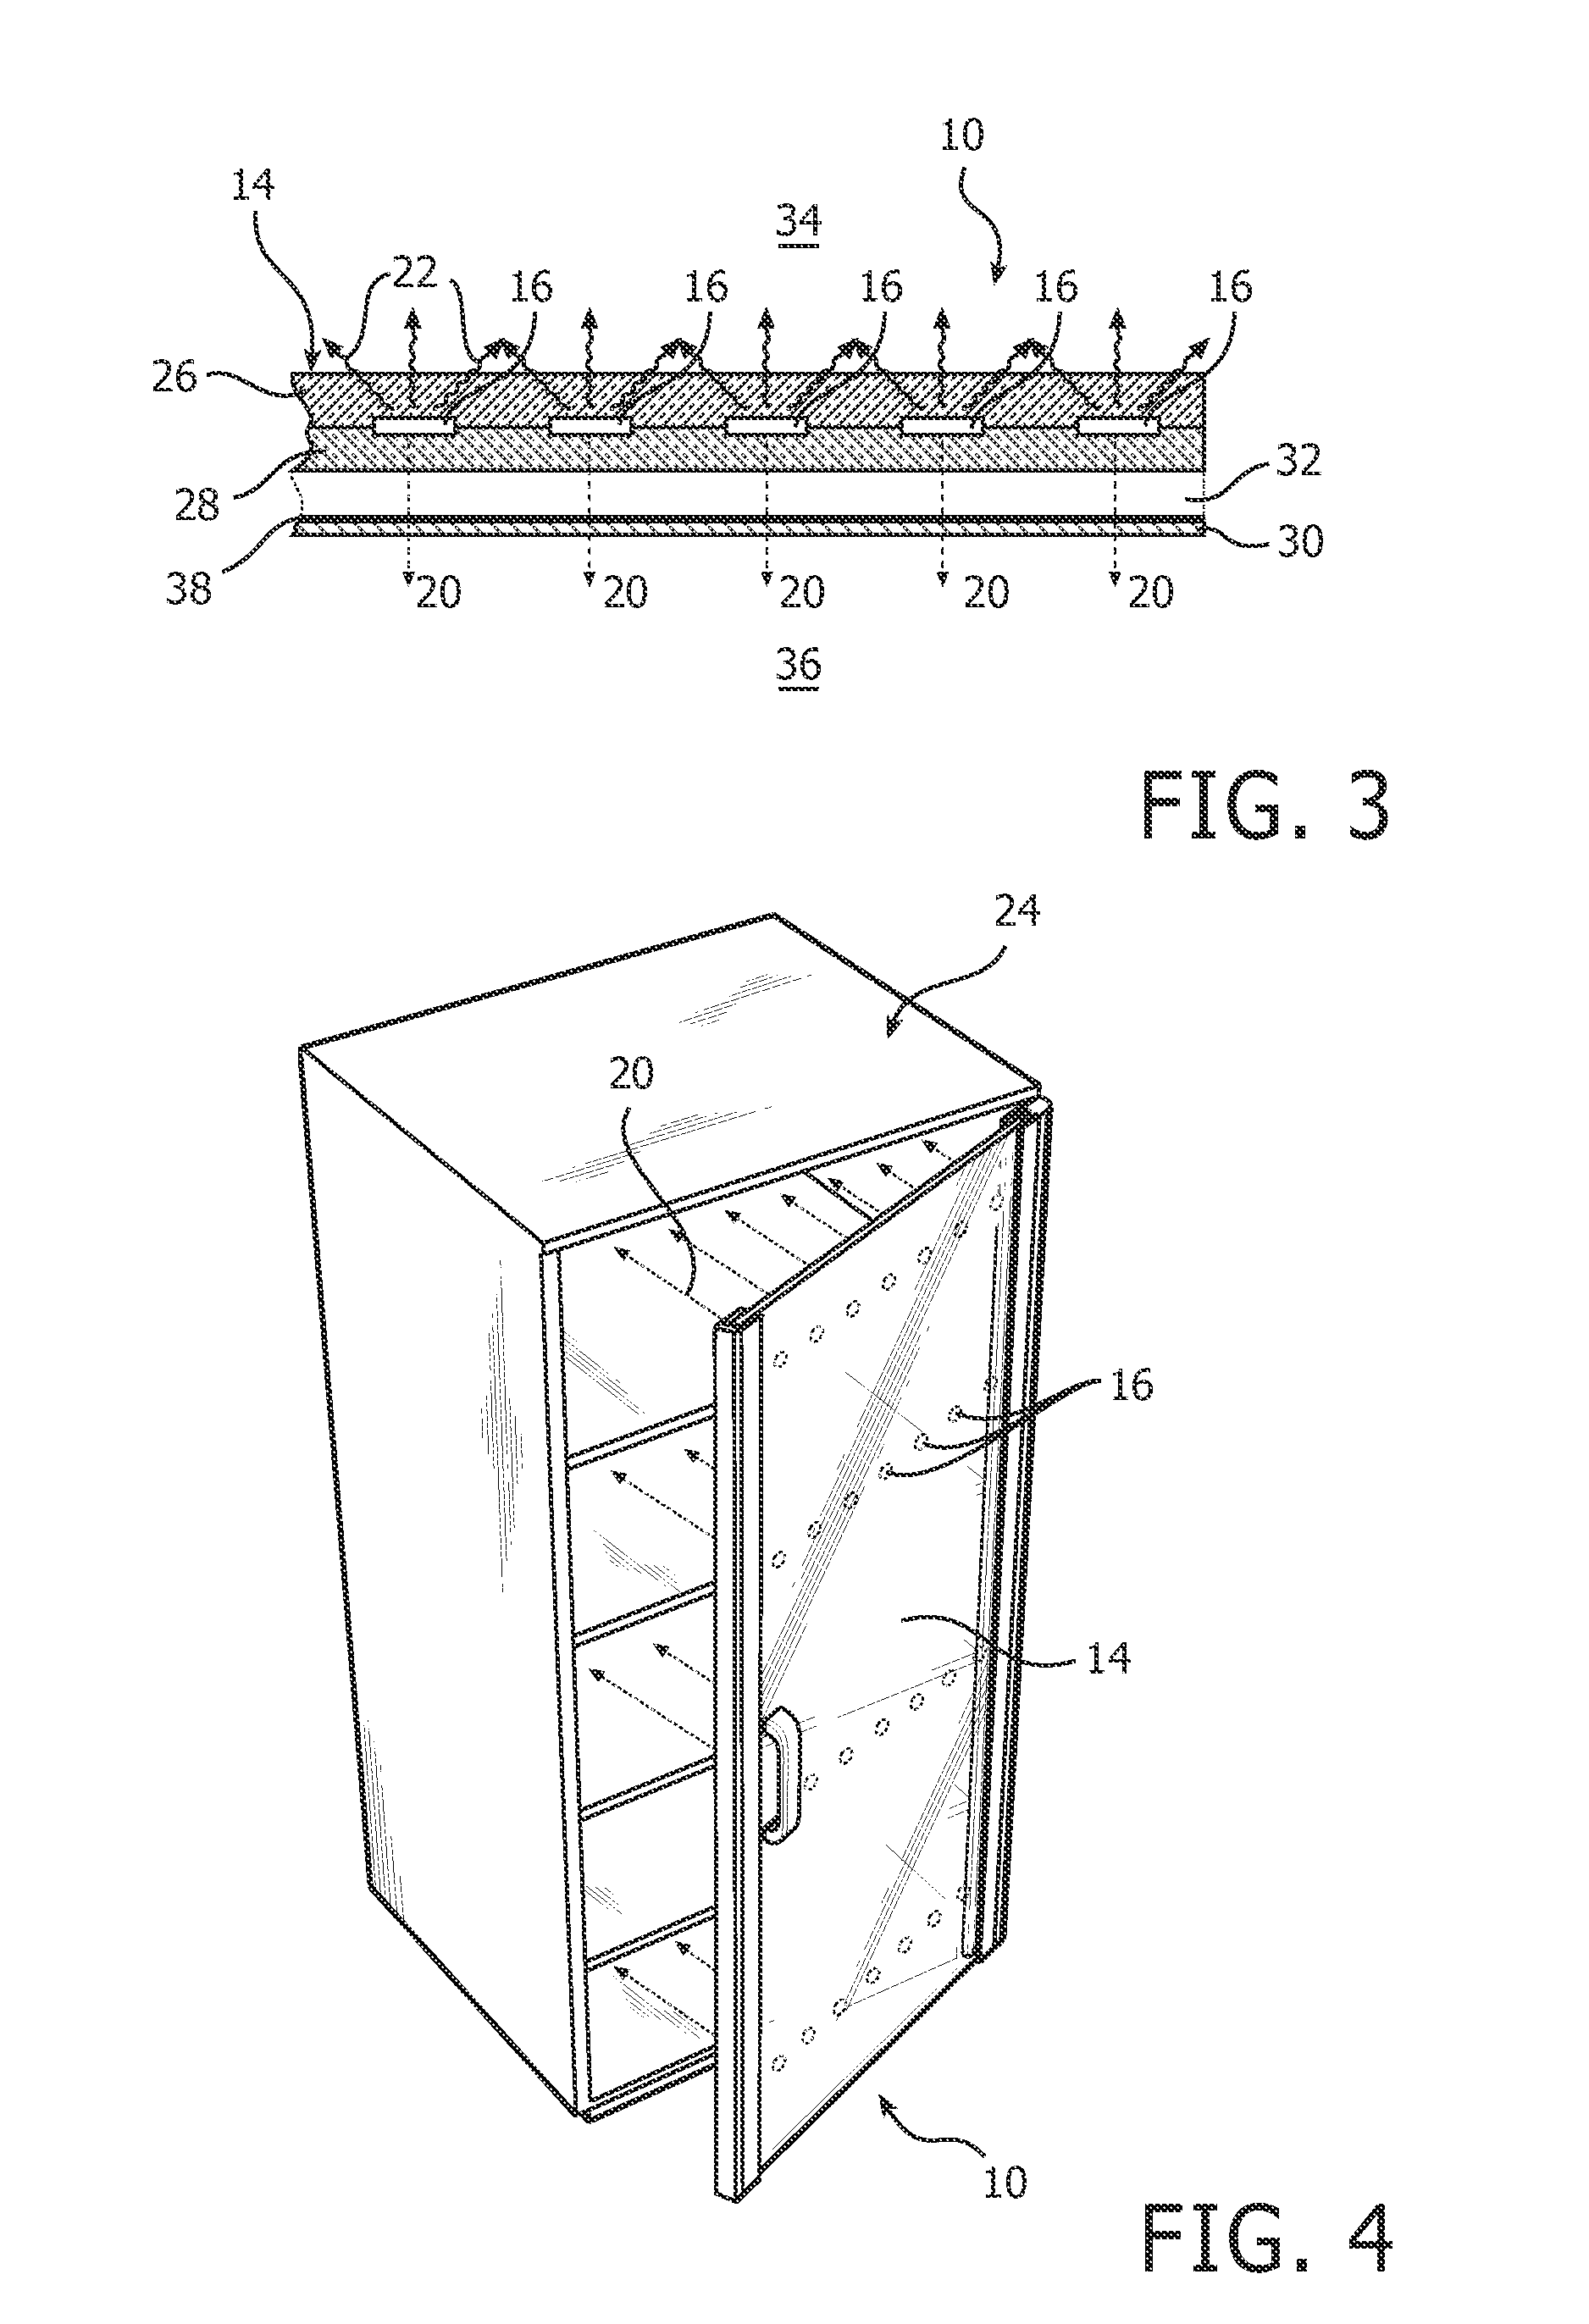 Door for a cold storage device such as a refrigerator or freezer